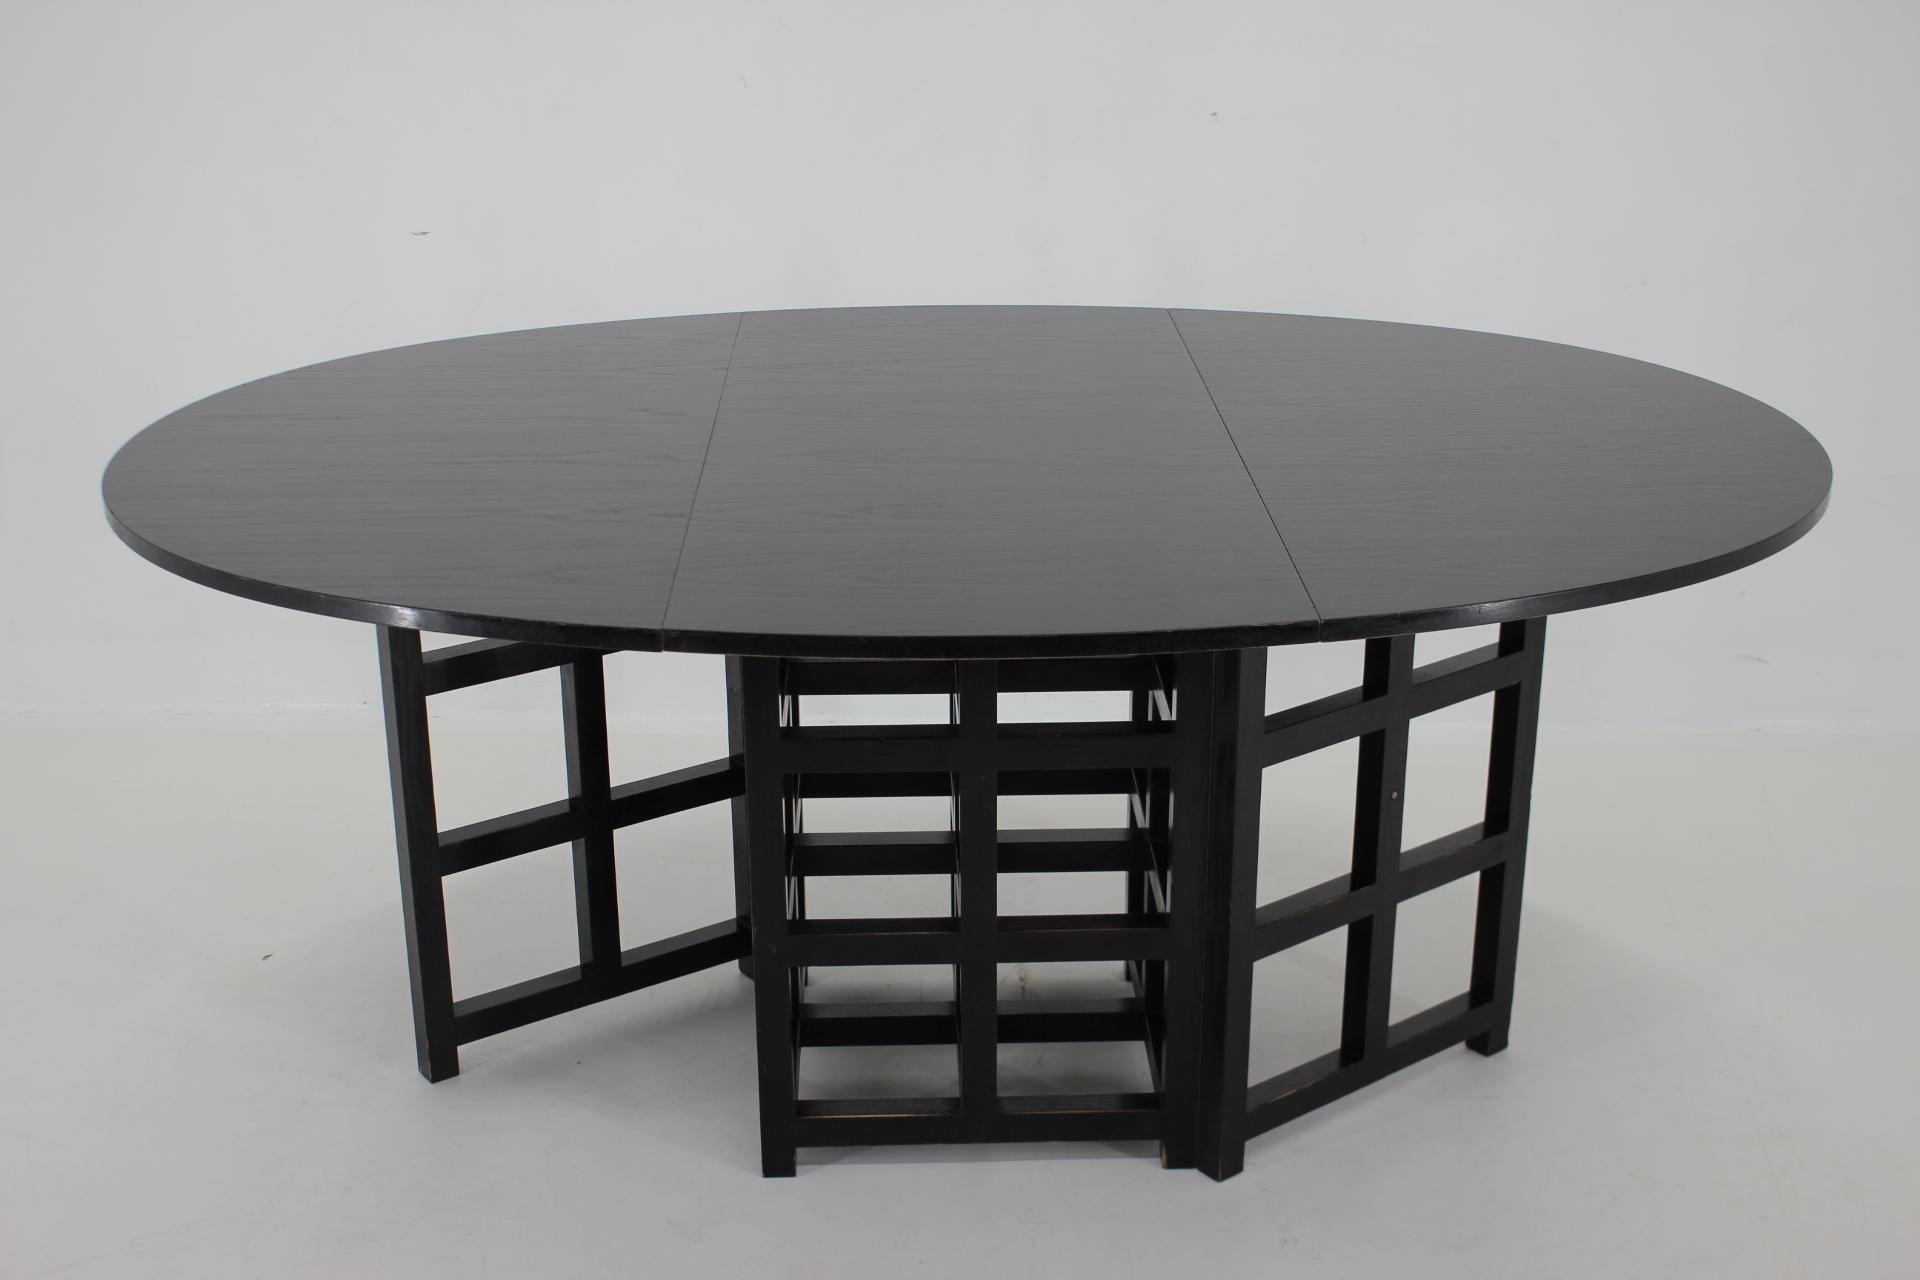 Mid-Century Modern 1970s Charles Rennie Mackintosh Oval Dining Table 322 Ds1 for Cassina, Italy